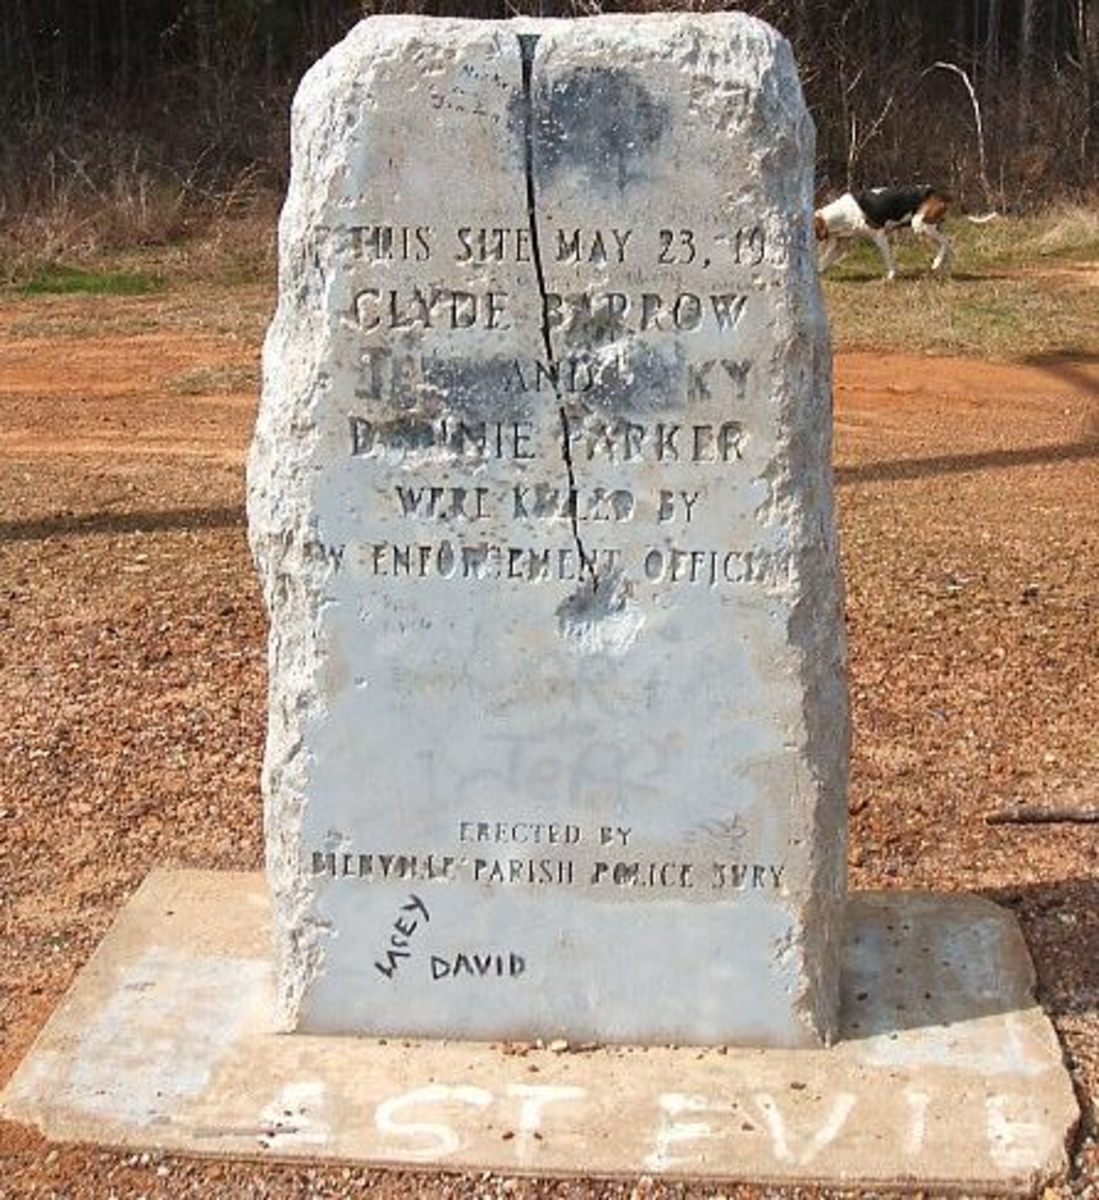 Site marker at death scene Gibsland, Texas